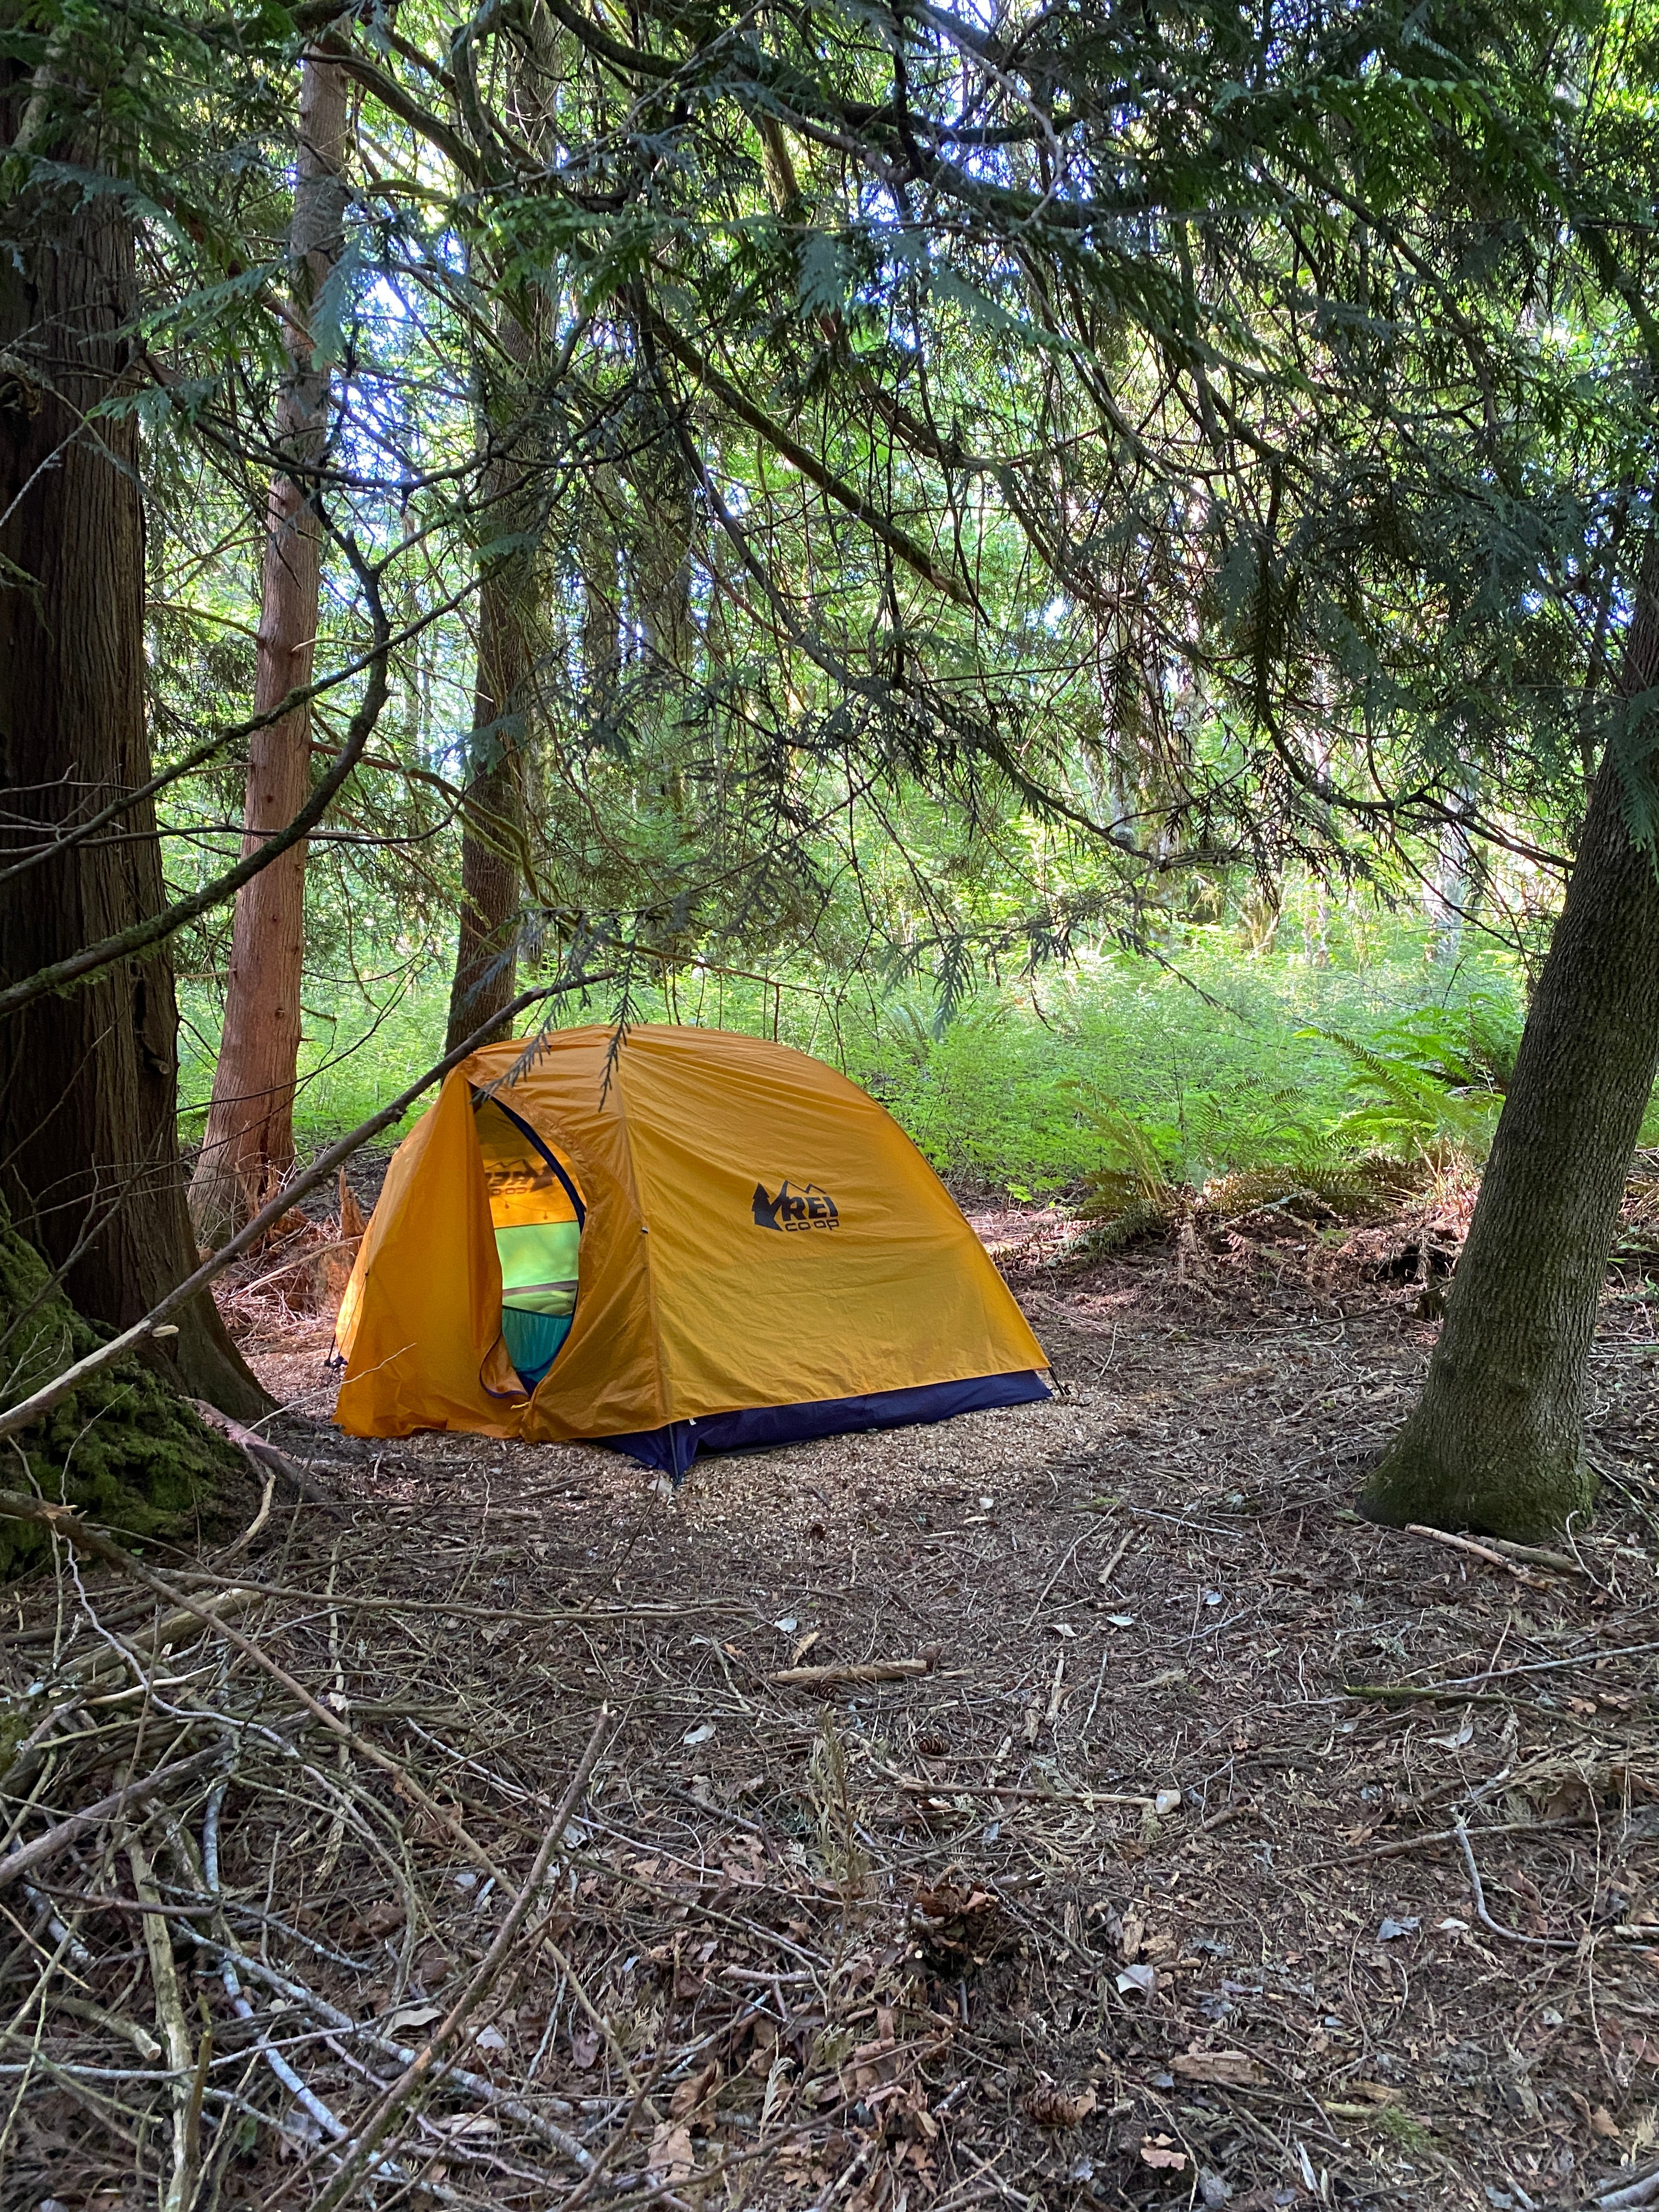 Camper submitted image from Marmot House Old Growth Forest - 2